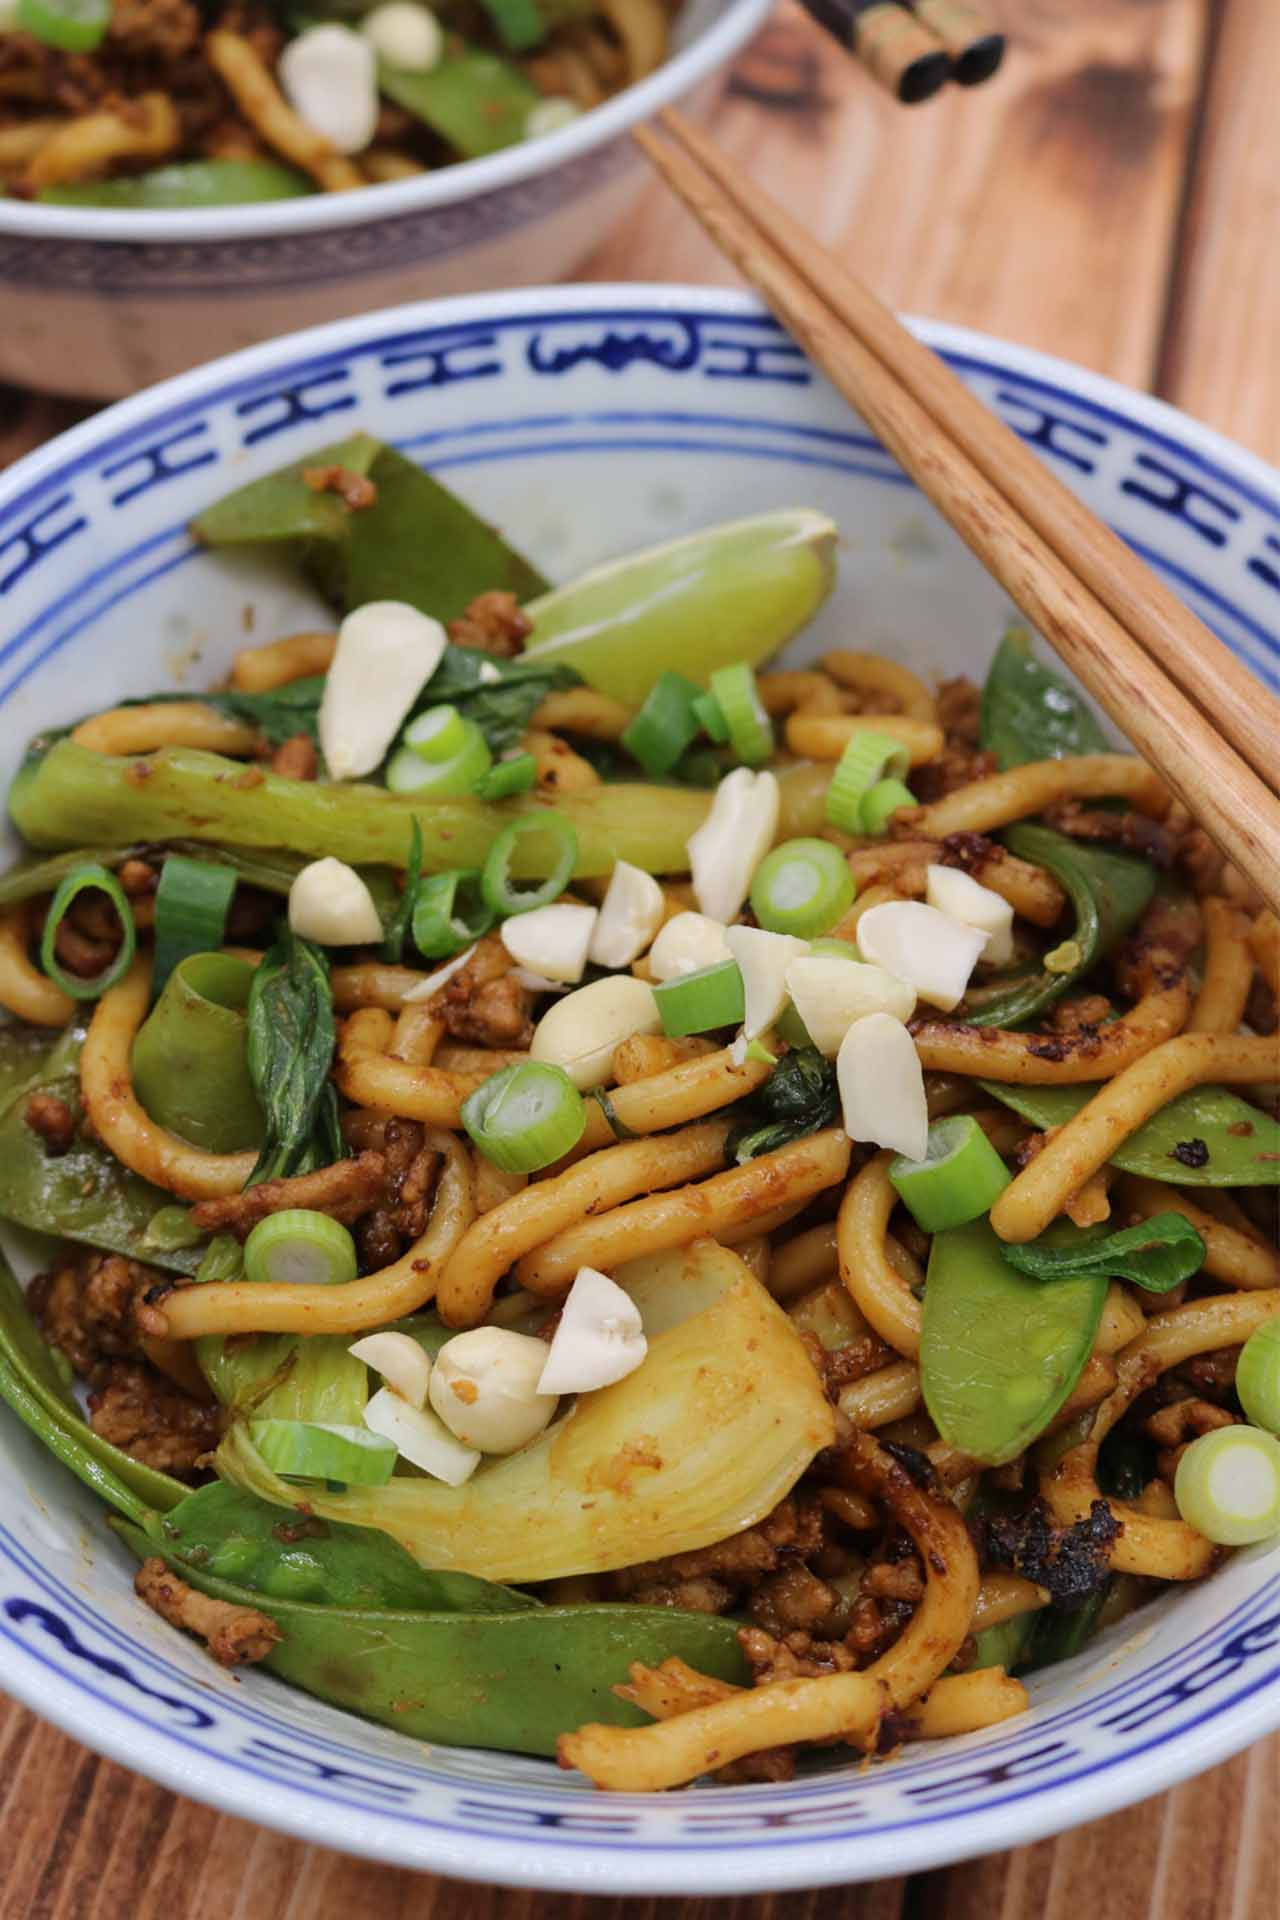 Spicy Pork and Peanut Noodles, Spicy Pork and Peanut Noodles